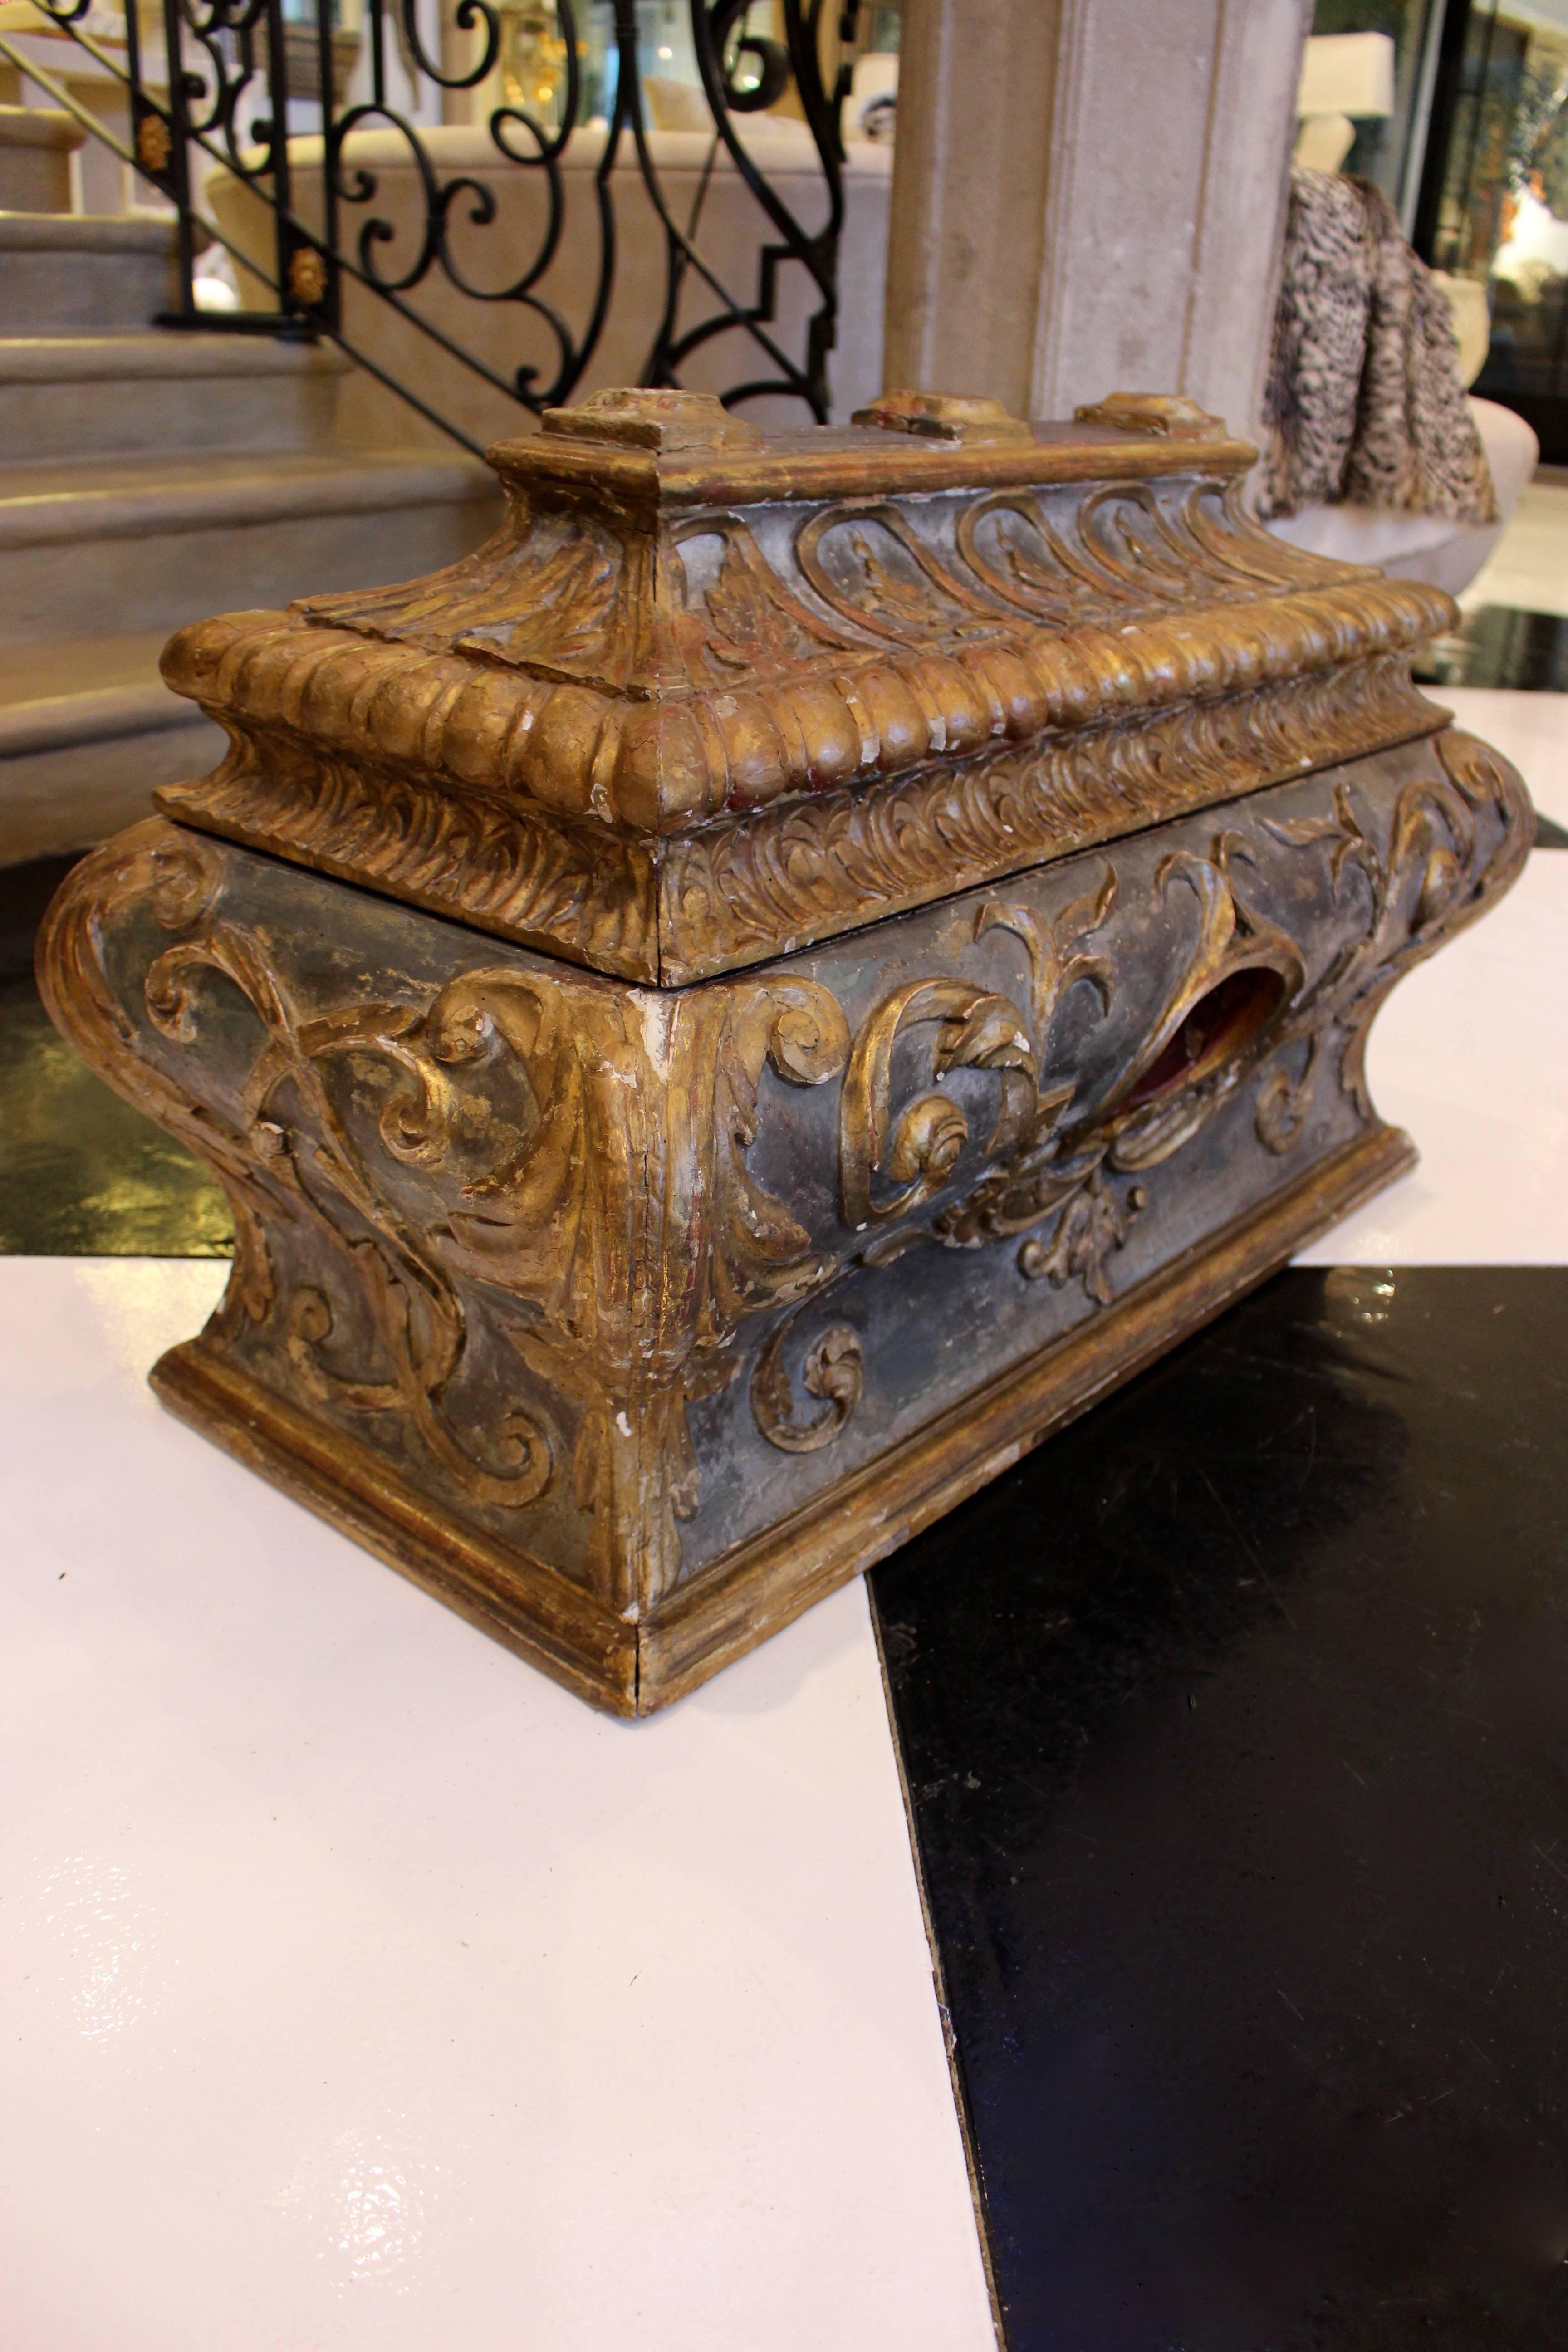 An Italian Rococo sarcophagus-shaped wooden chest of bombé rectangular form with richly carved gilt decoration on a distressed ebonized ground. The hinged pagoda top lid is skillfully carved with a frieze of urns in arches above a convex gadrooned